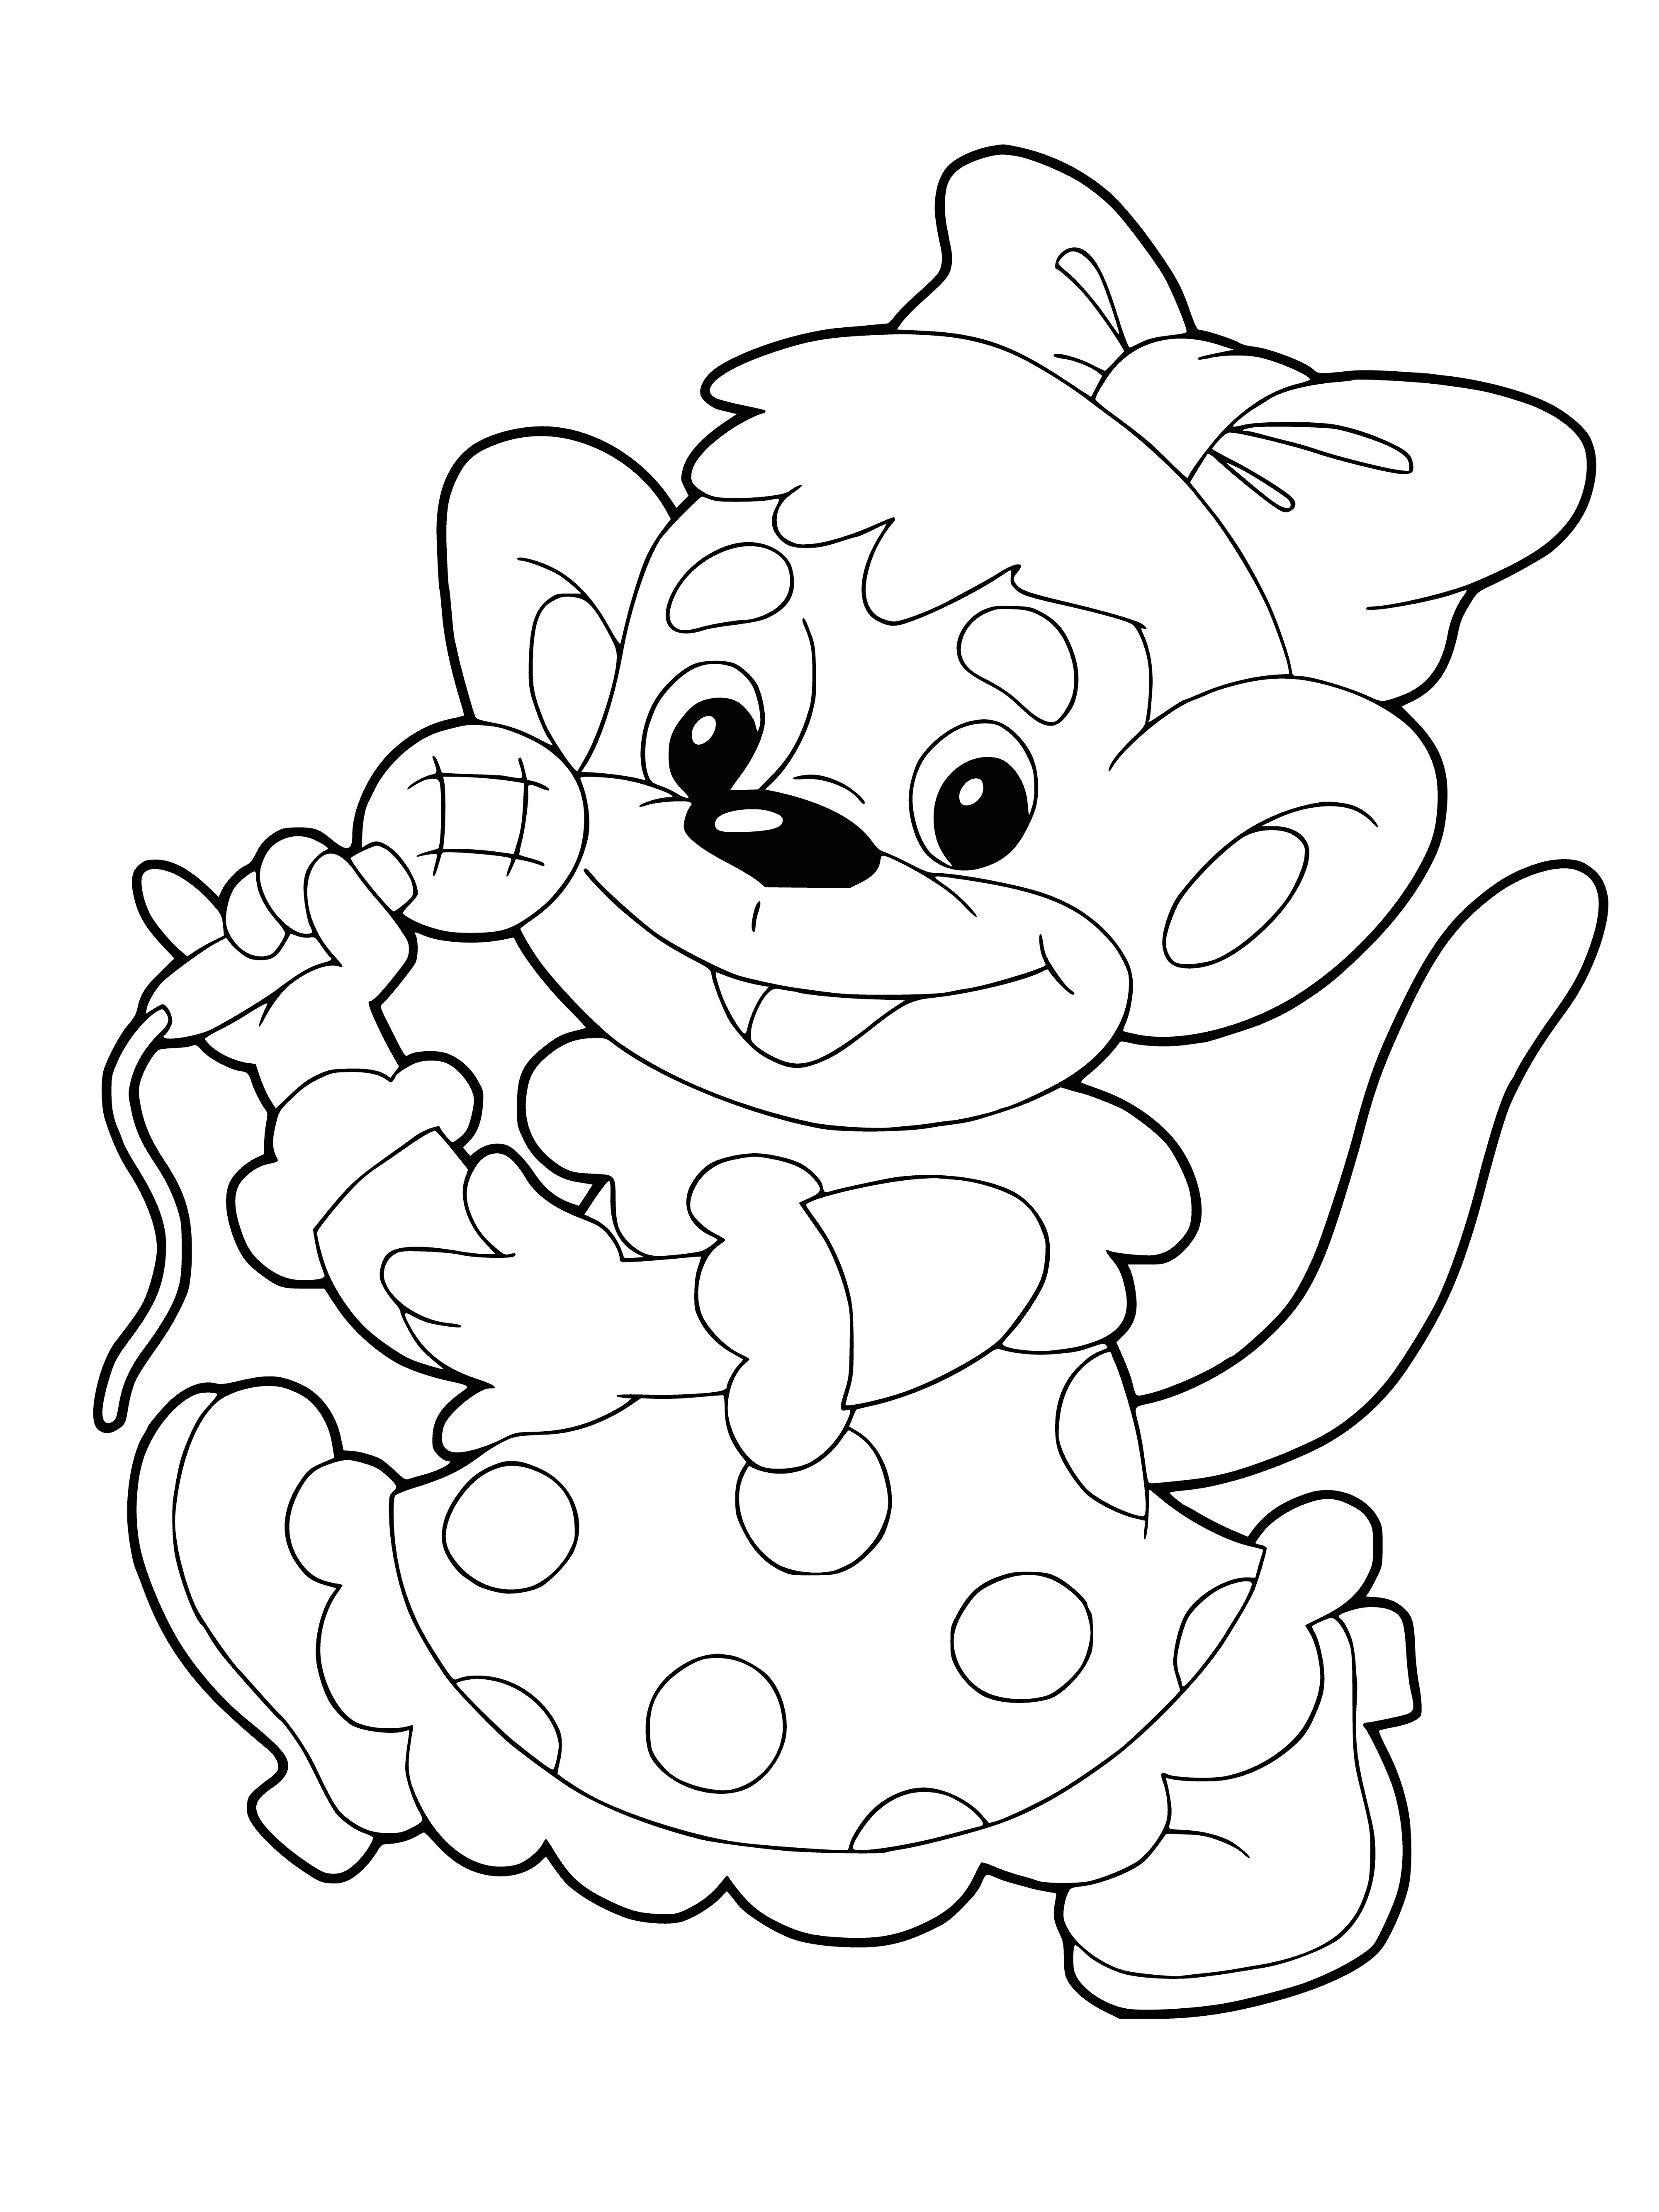 Monkey with microphone coloring page